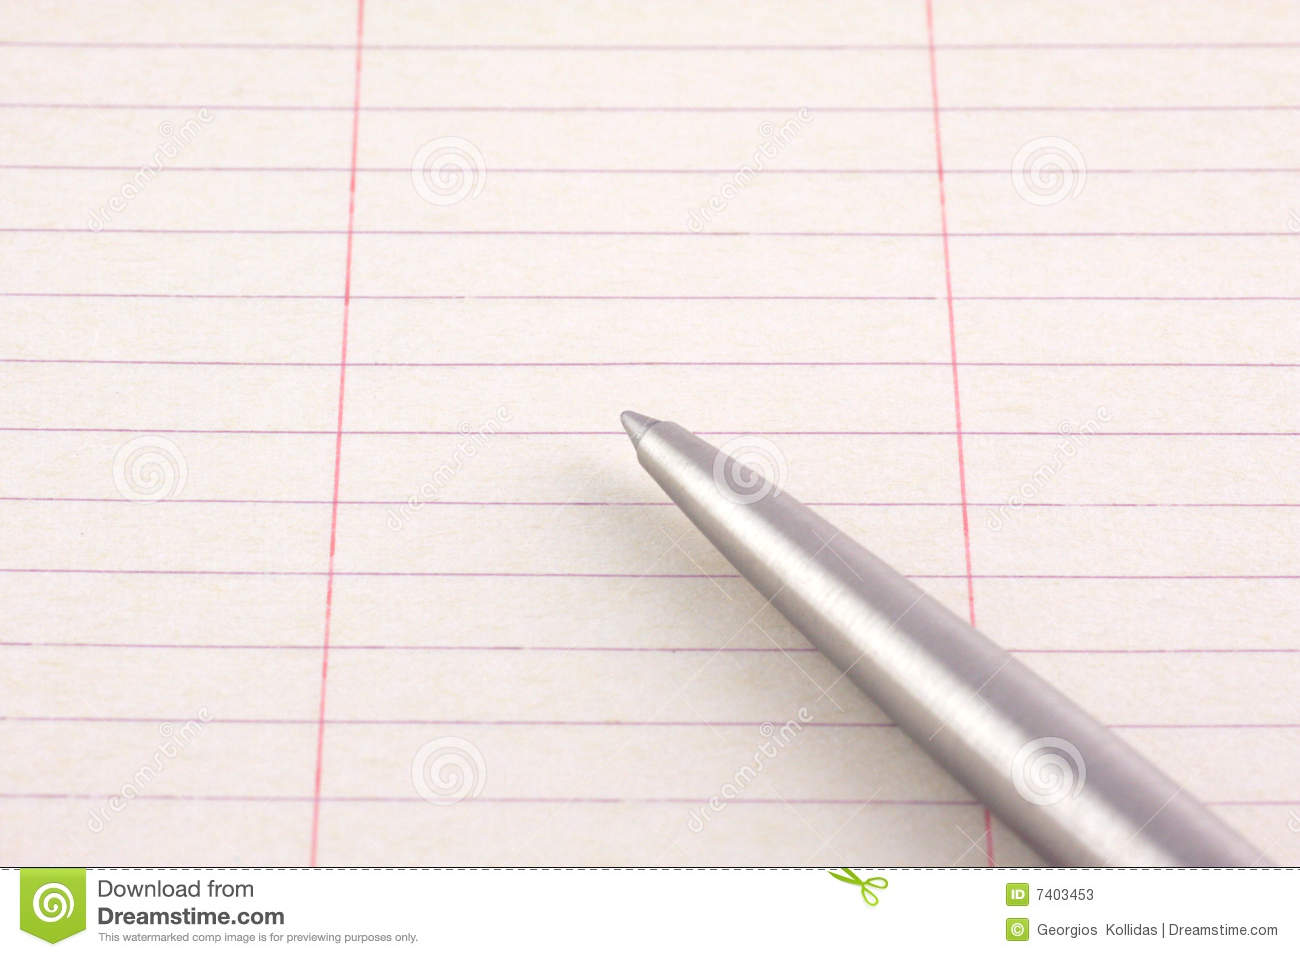 Notepad And Pen Stock Photos   Image  7403453